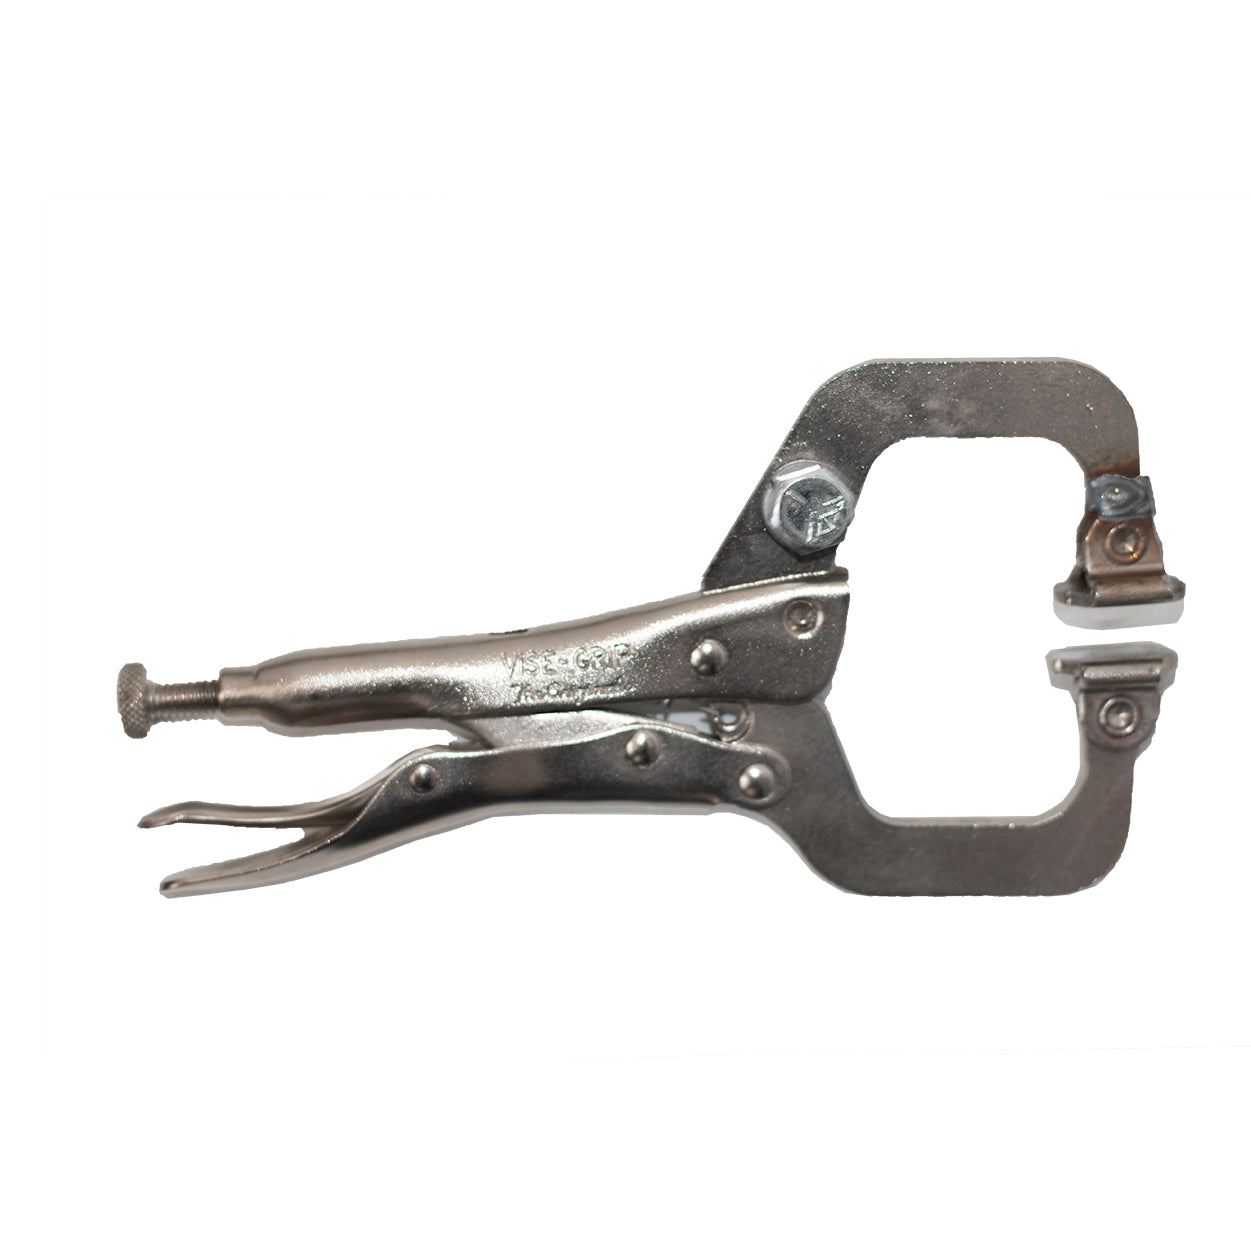 Vise Ground Clamp for Stud Welding